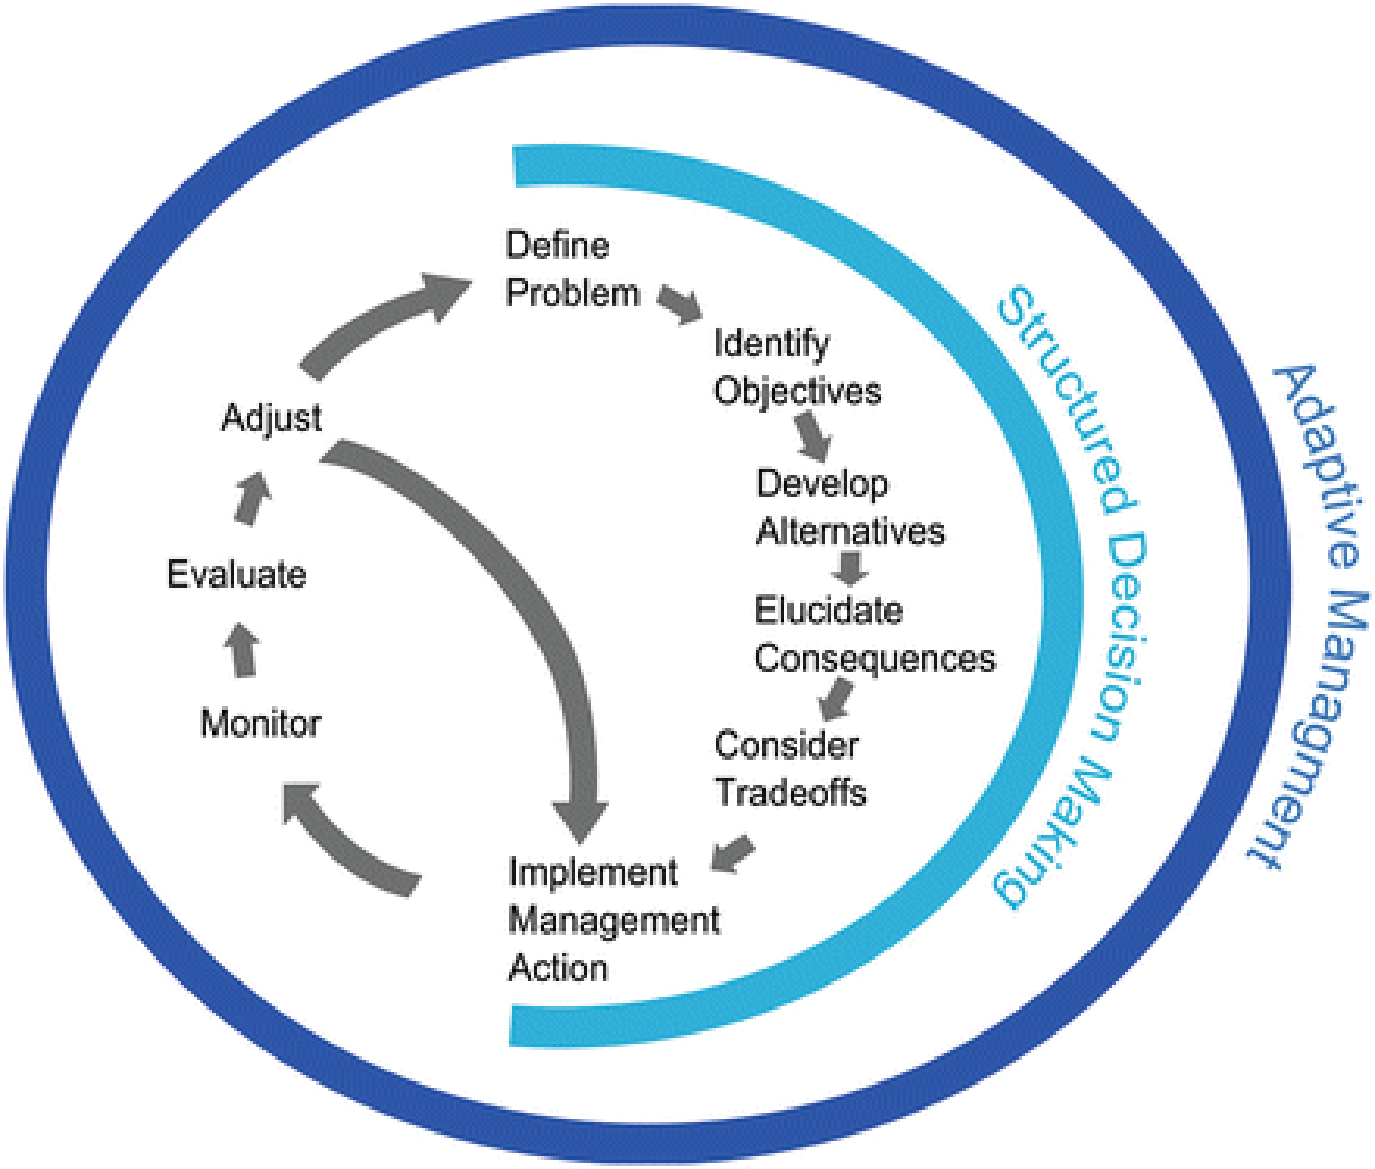 Diagram outlining the adaptive management cycle, breaking down several structured decision-making steps. For a complete description, call SDSU Extension at 605-688-4792.